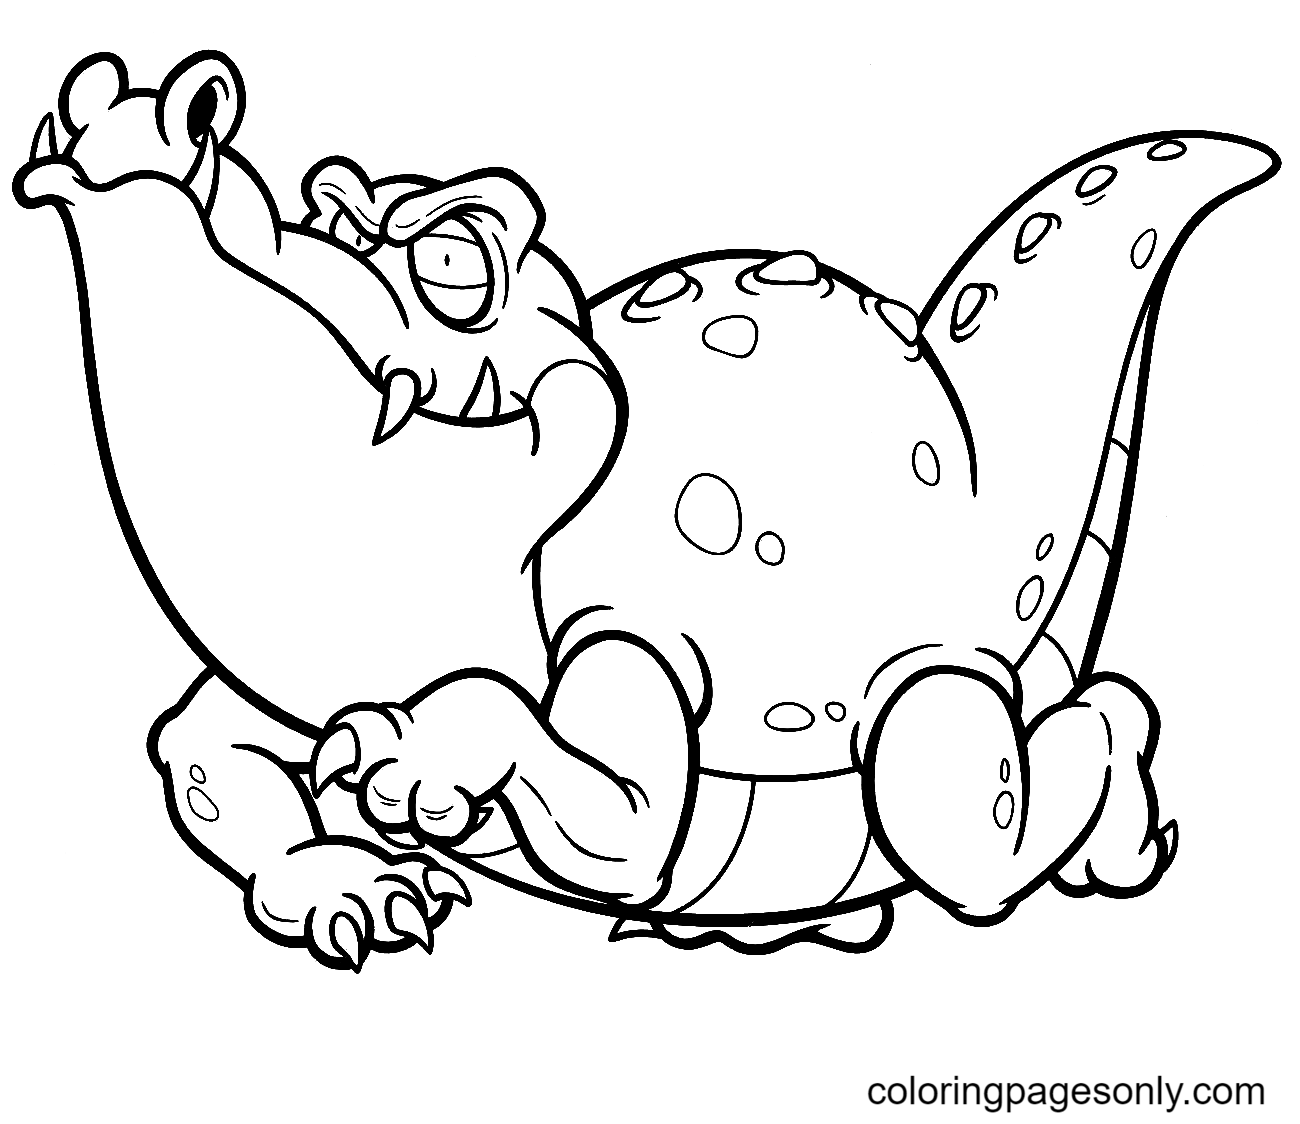 Angry Alligator Coloring Page